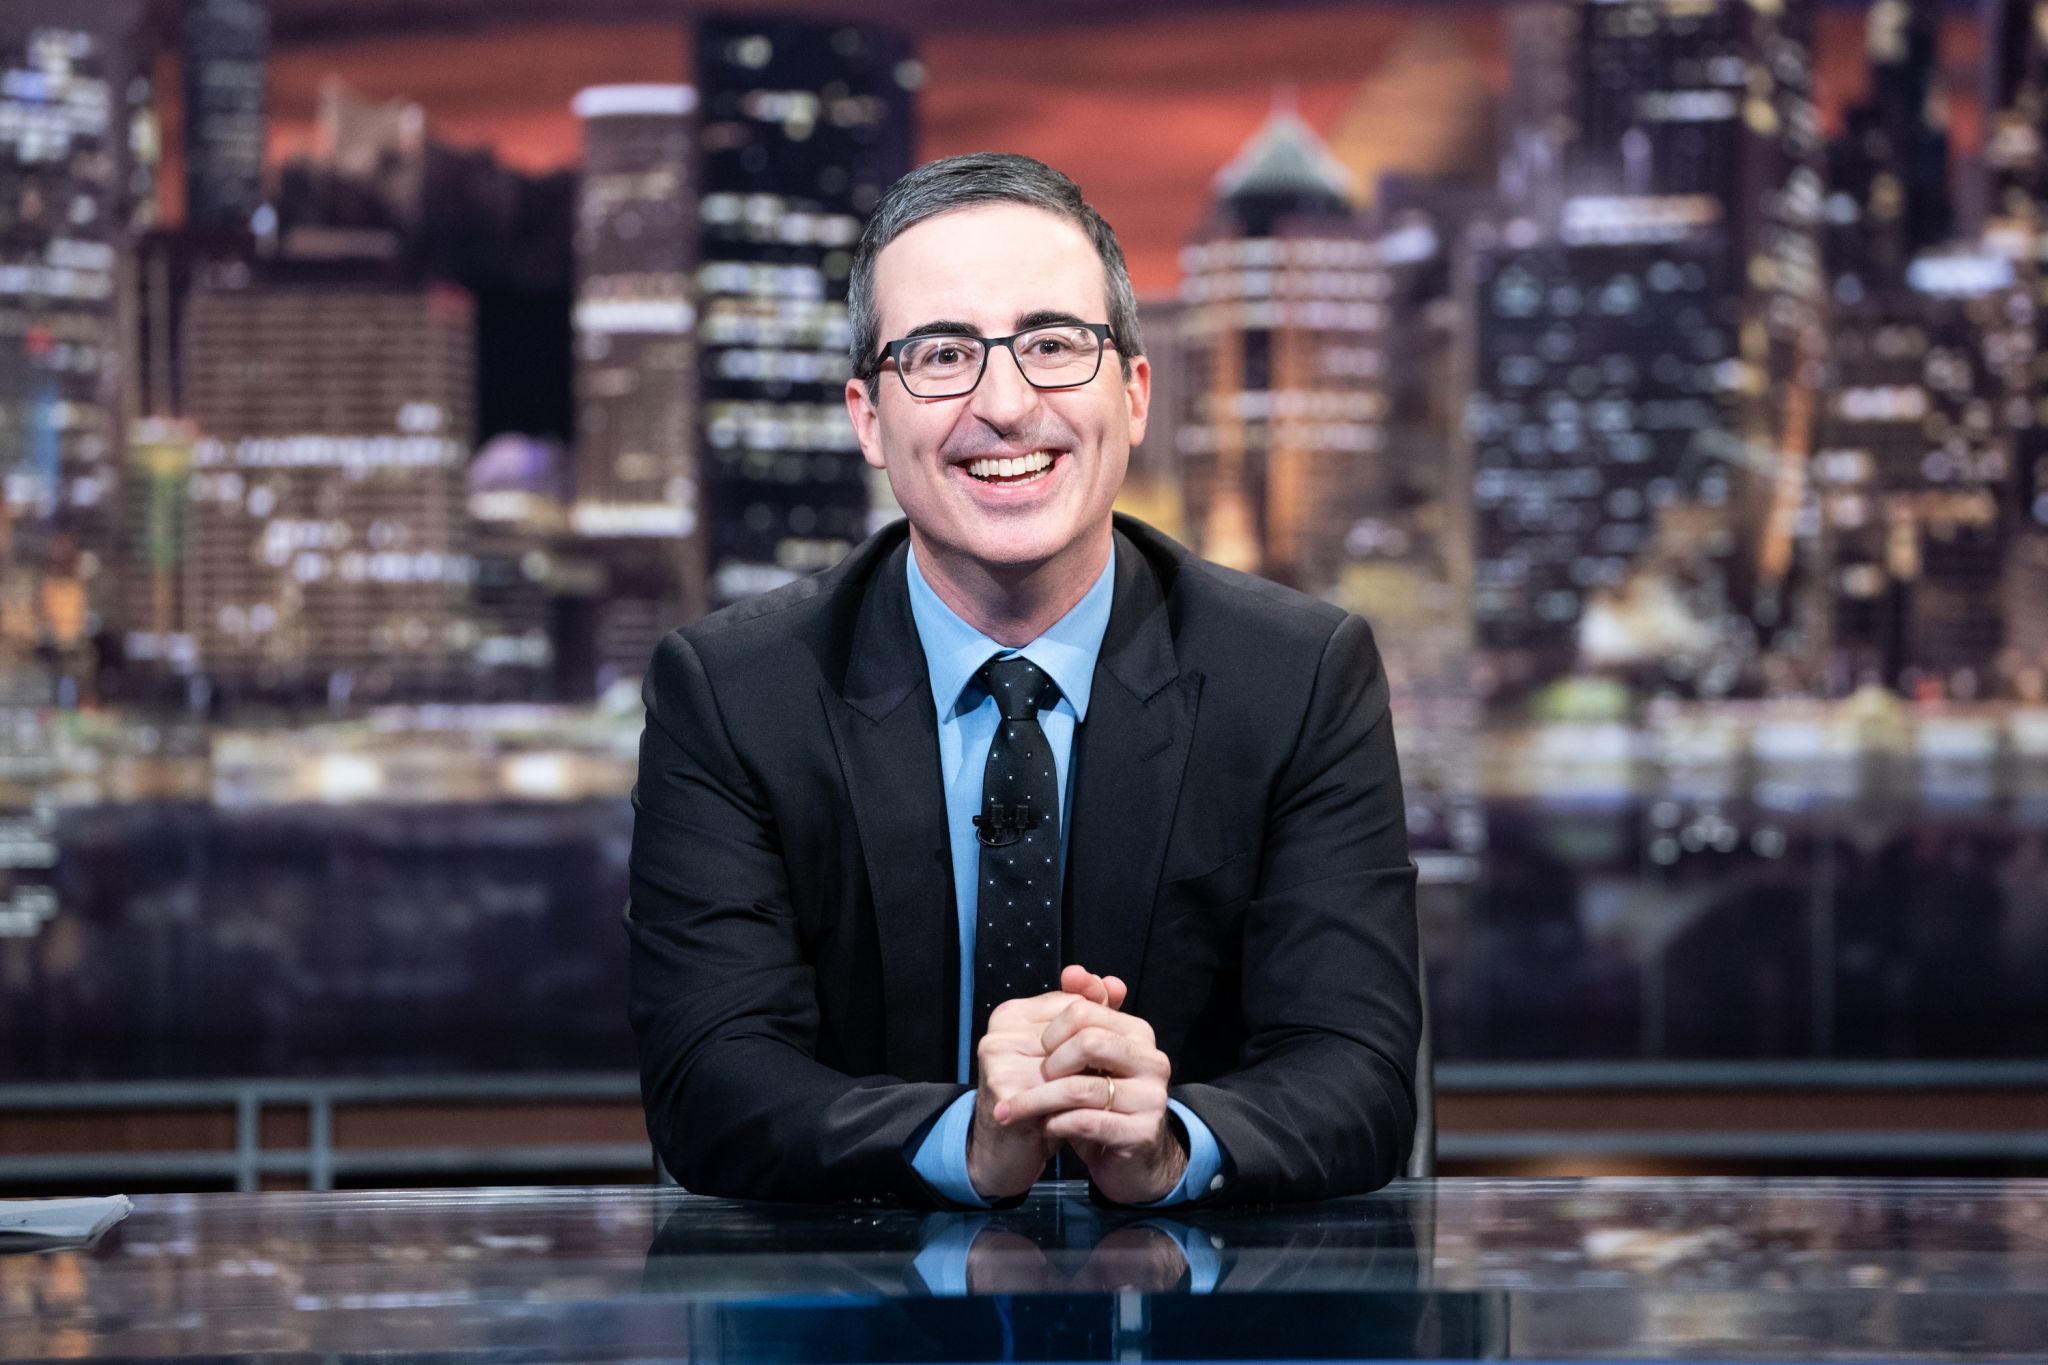 'Last Week Tonight' host John Oliver announces New Year's sets in San